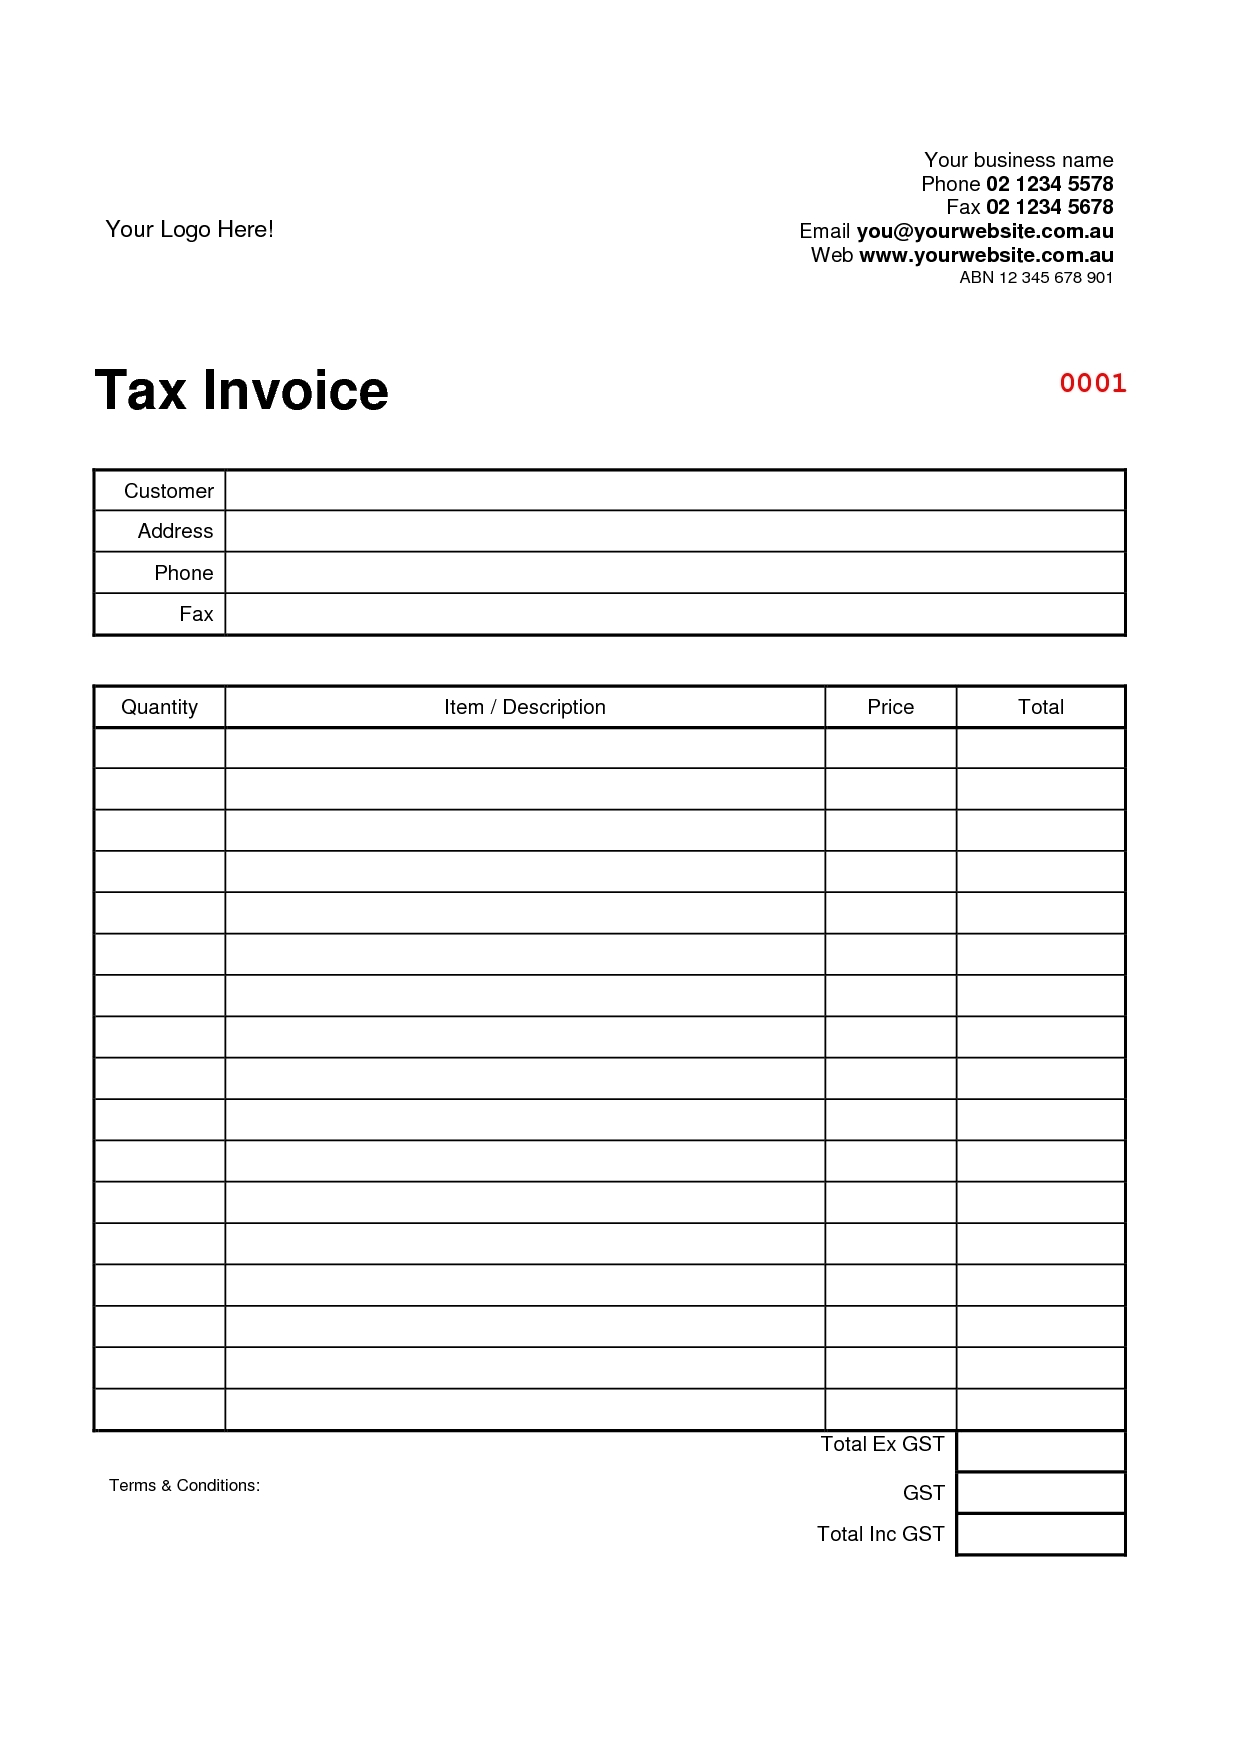 template for invoices medical resume template blank gift vouchers blank tax invoice template